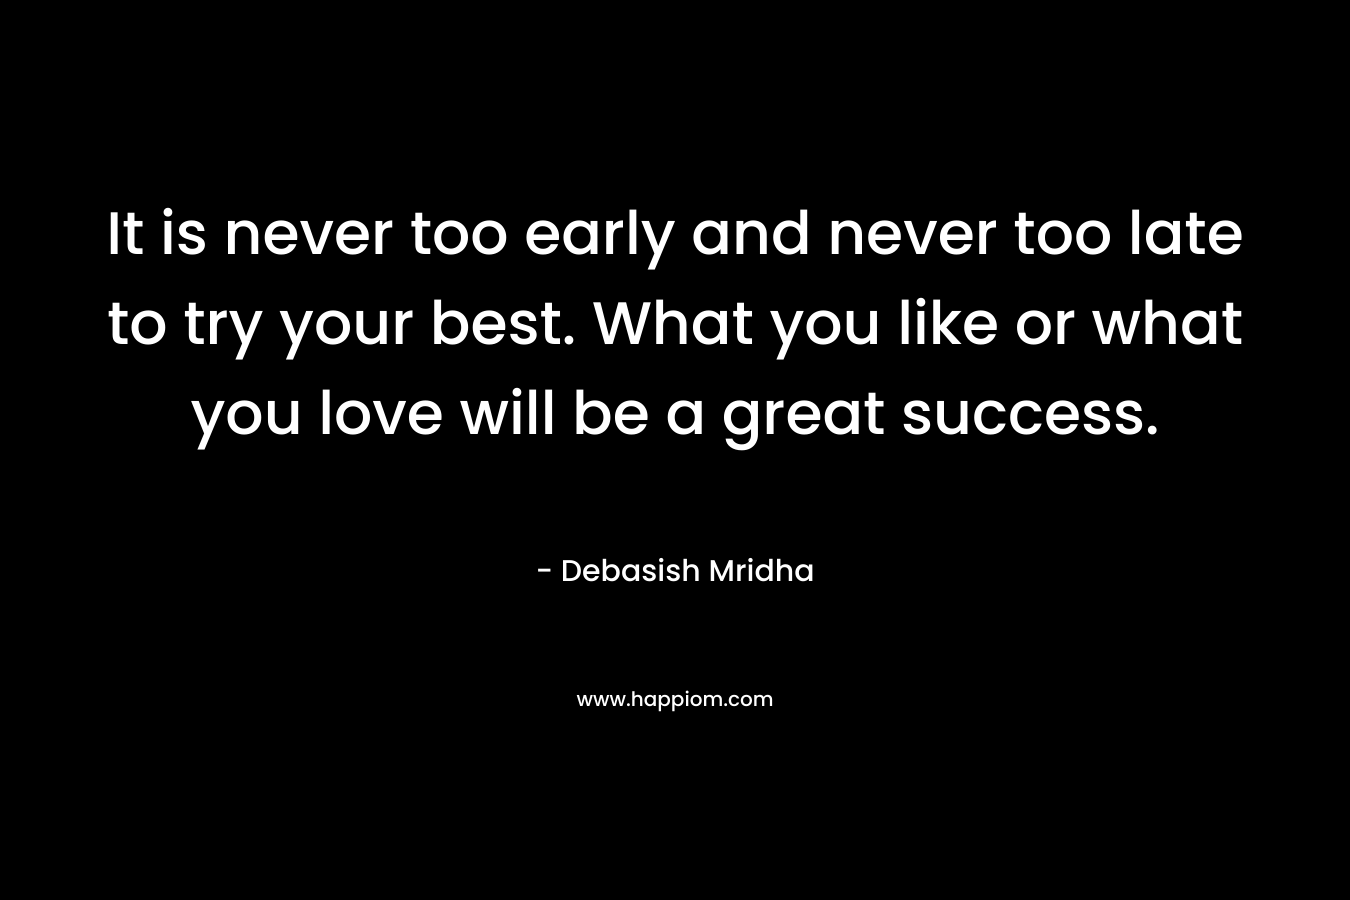 It is never too early and never too late to try your best. What you like or what you love will be a great success.